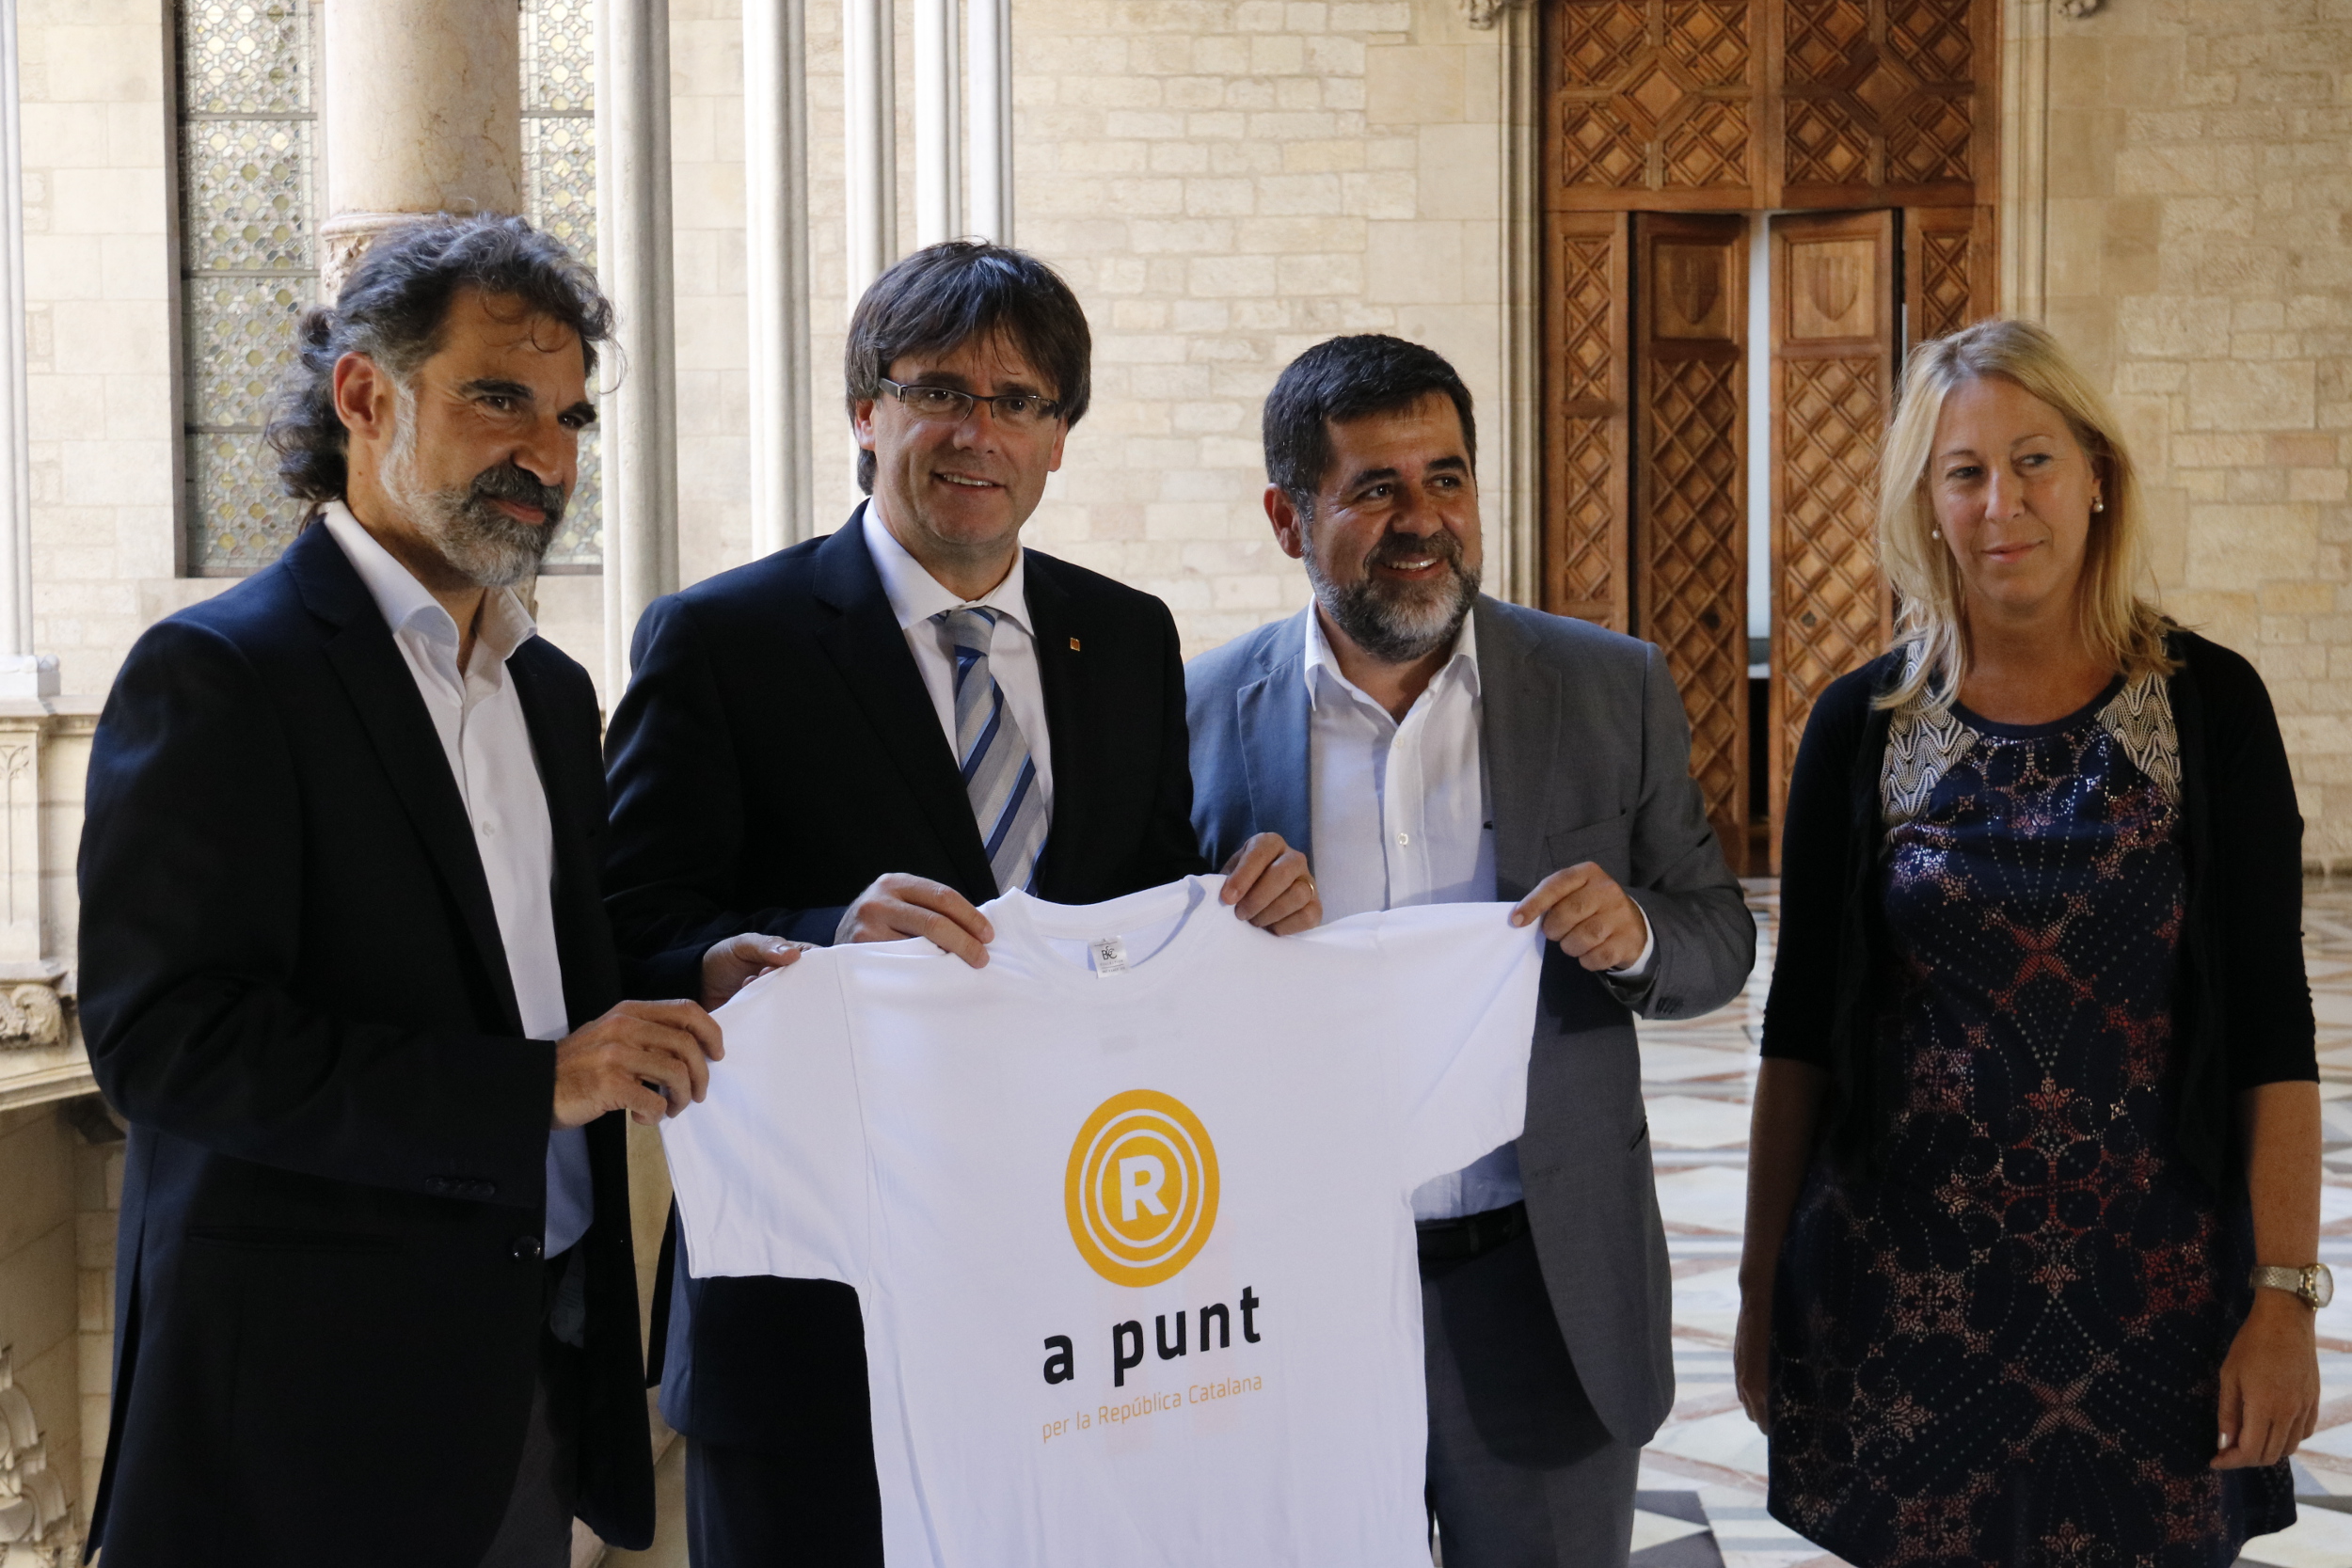 Catalan President, Carles Puigdemont, together with the Catalan National Assembly's President, Jordi Sànchez, Òmnium Cultural's, Jordi Cuixart and the Catalan Government's spokeswoman, Neus Munté (by ACN)